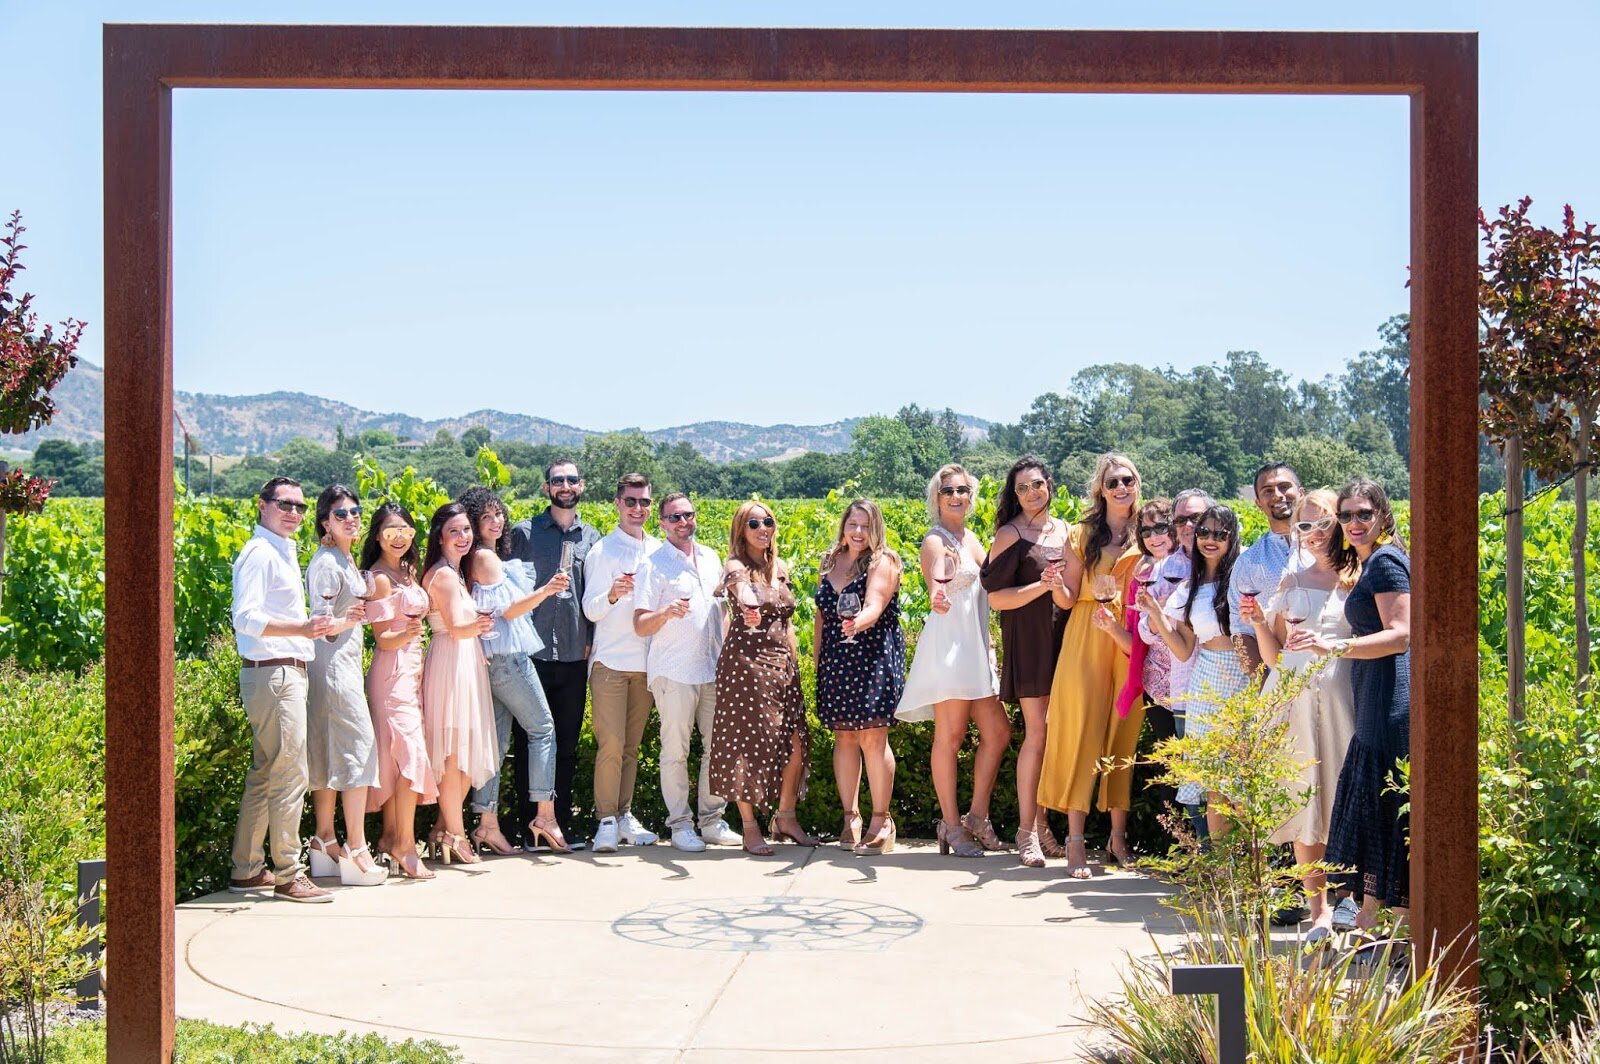 A Mused ^ Weekend Blogger Event at Patz &amp; Hall Winery Sonoma House